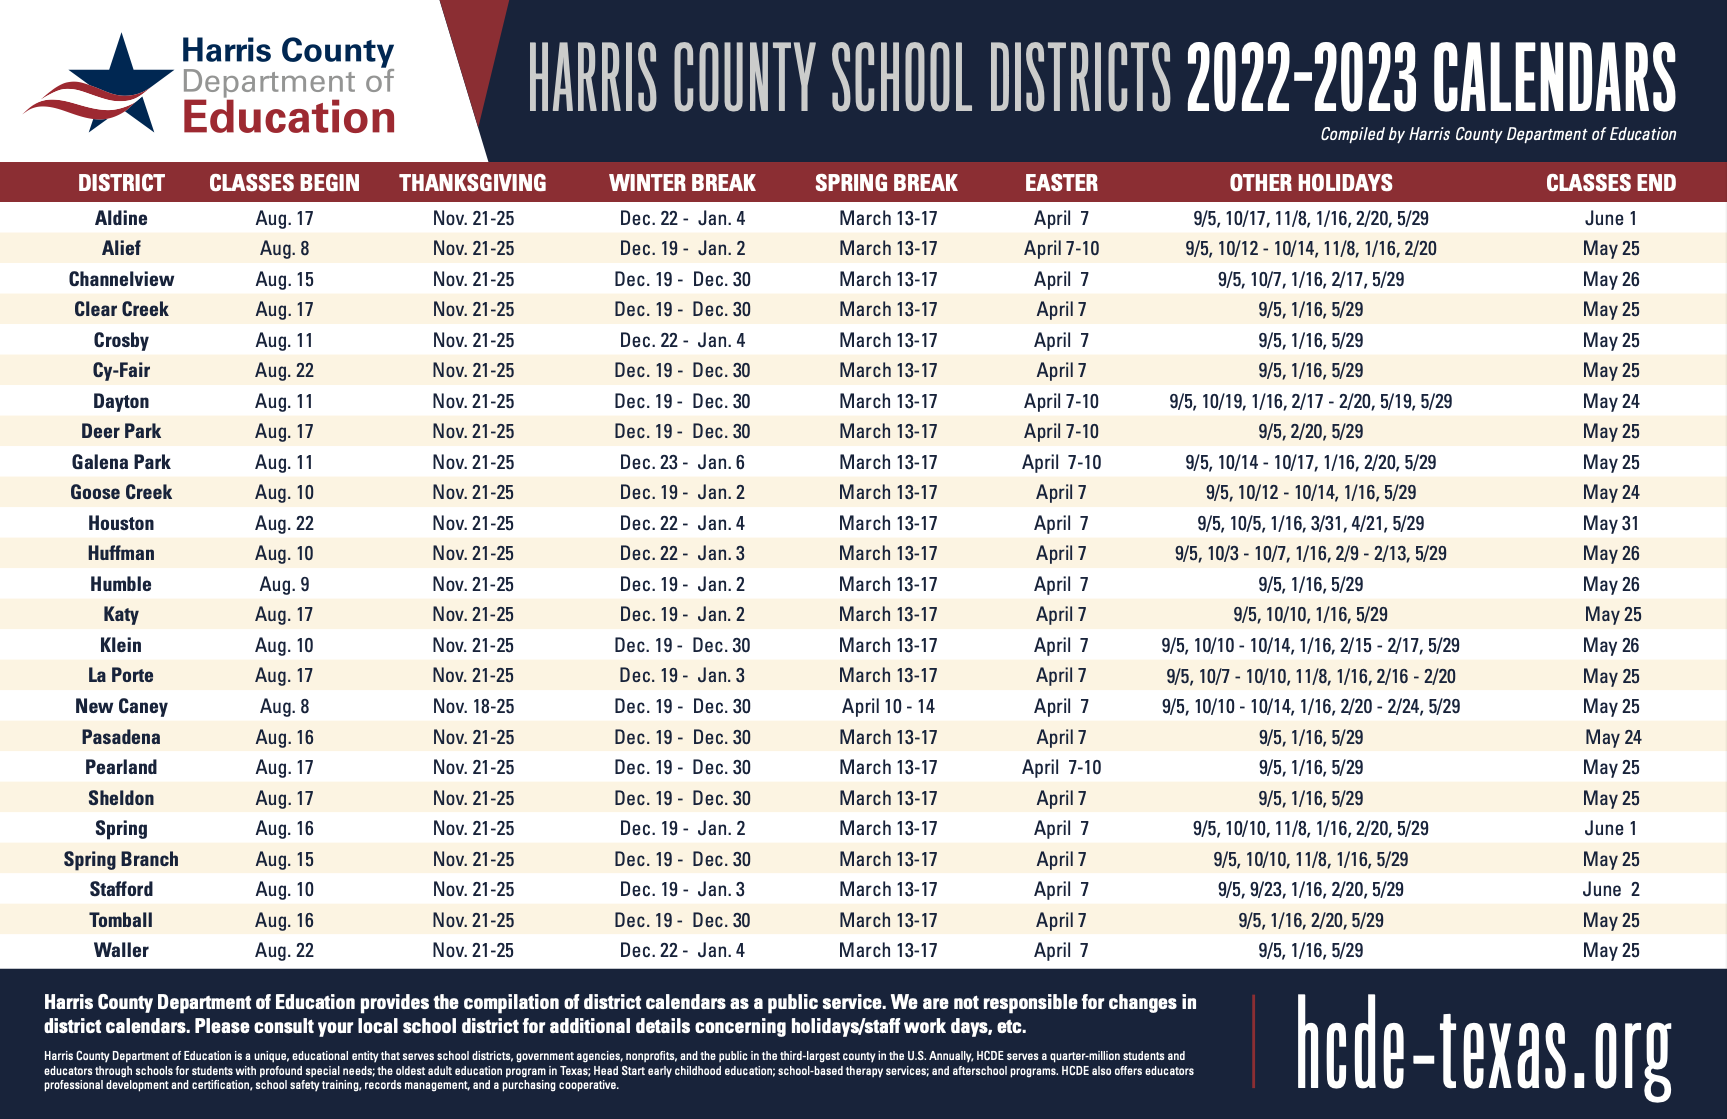 HCDE releases 2022-2023 comprehensive school calendar for 25 Harris County districts | Houston